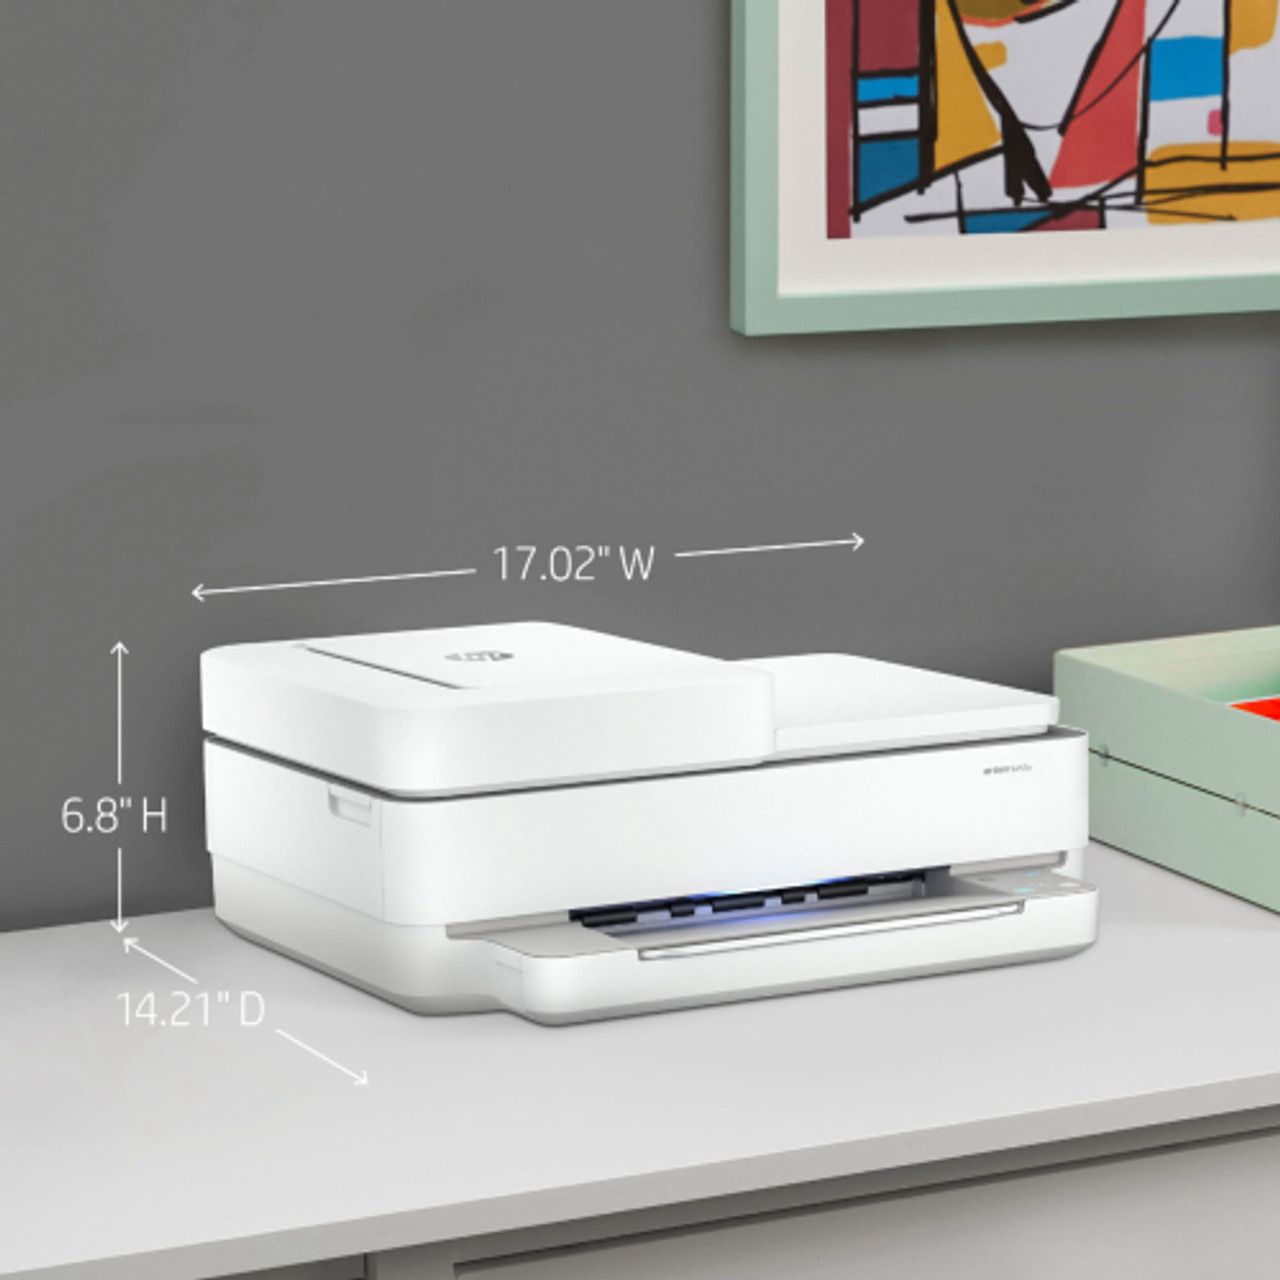 Hp Envy 6455e Wireless All In One Inkjet Printer With 3 Months Of Instant Ink Included With 4853